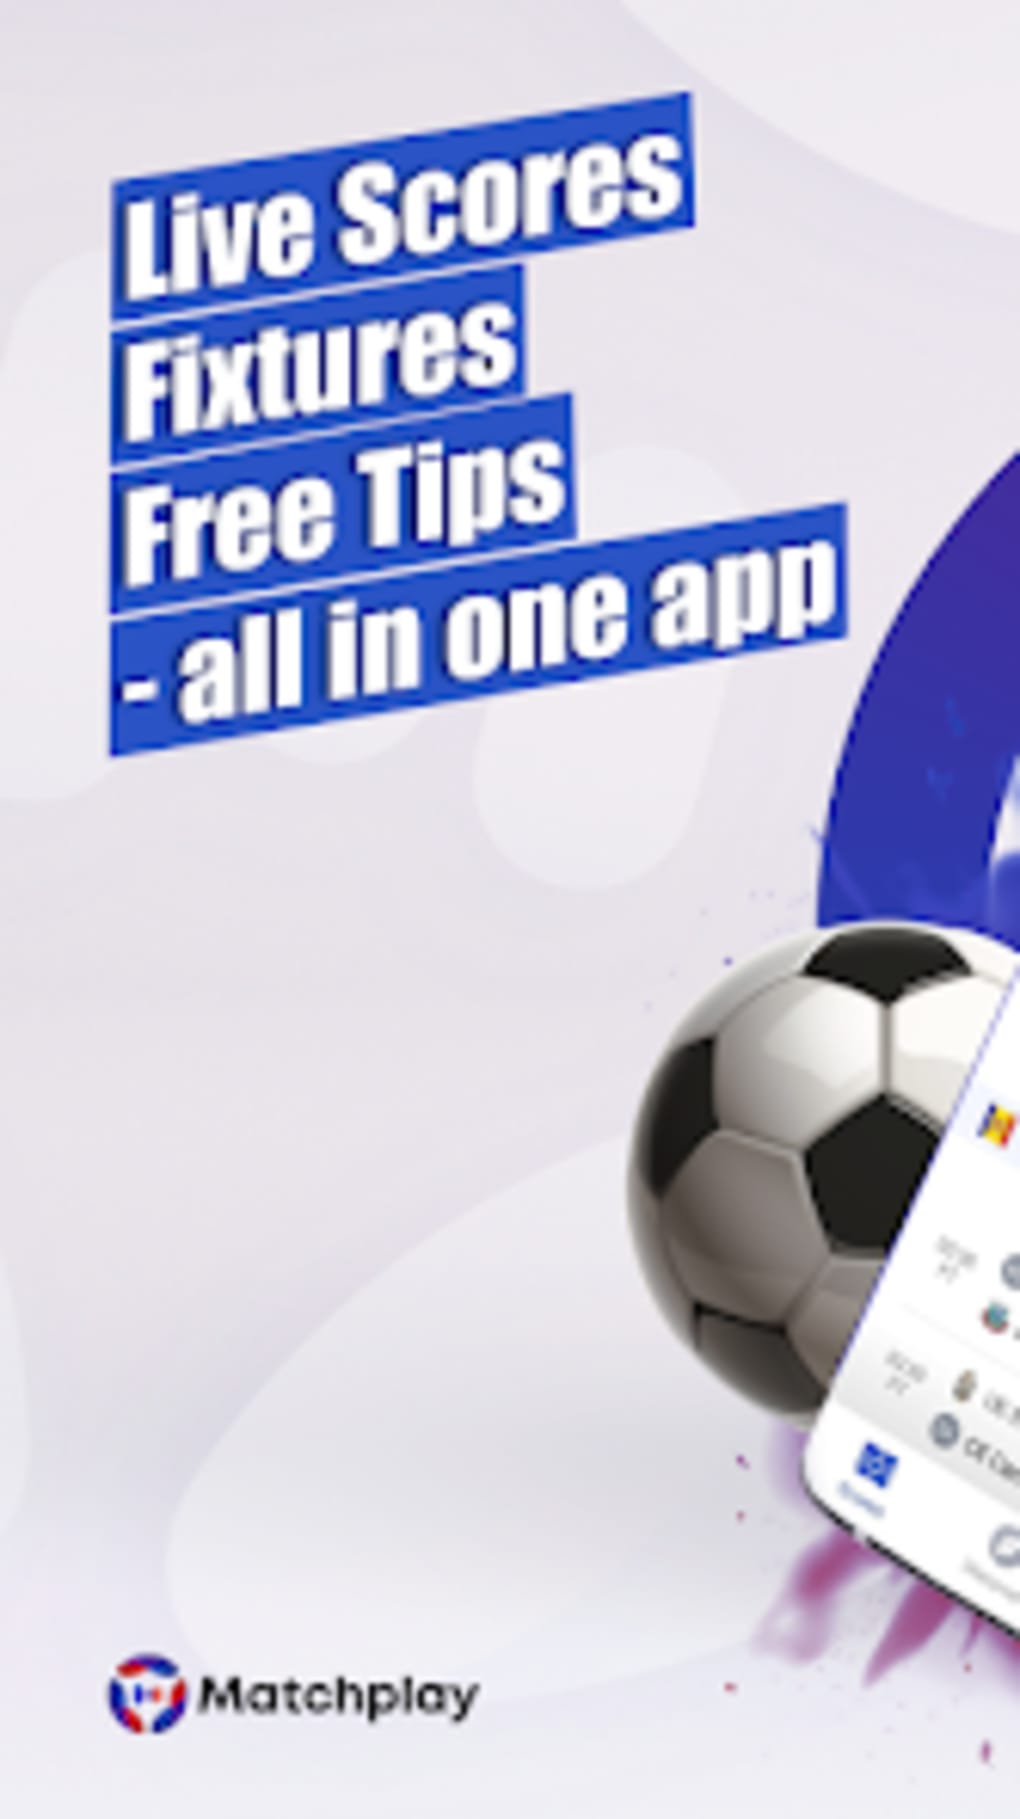 Matchplay - Live Scores Tips for Android